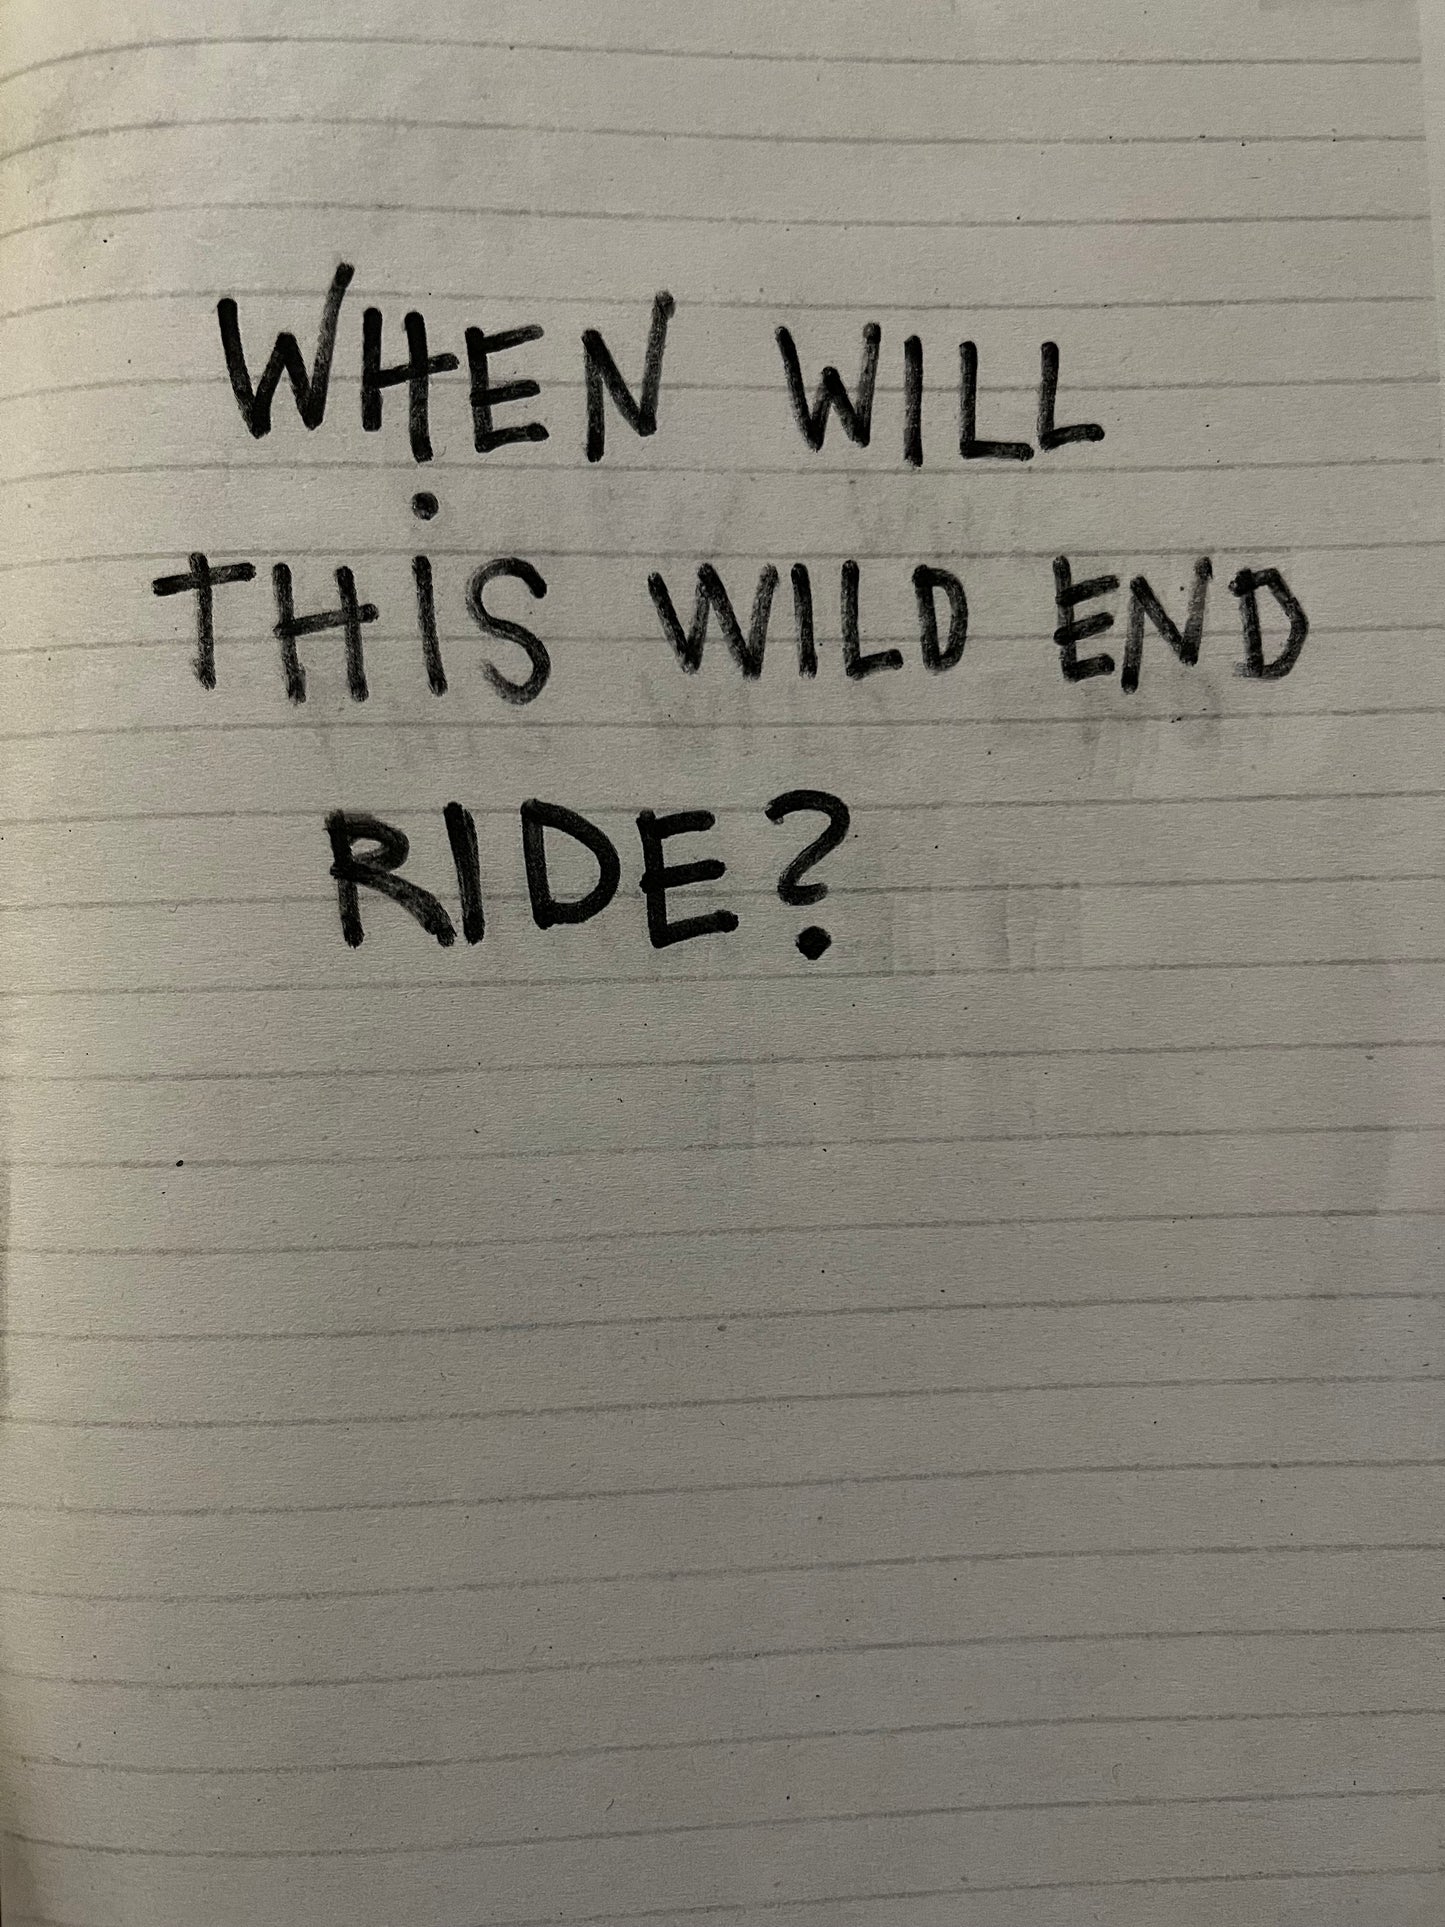 When Will This Wild End Ride? By Sigi Uhm